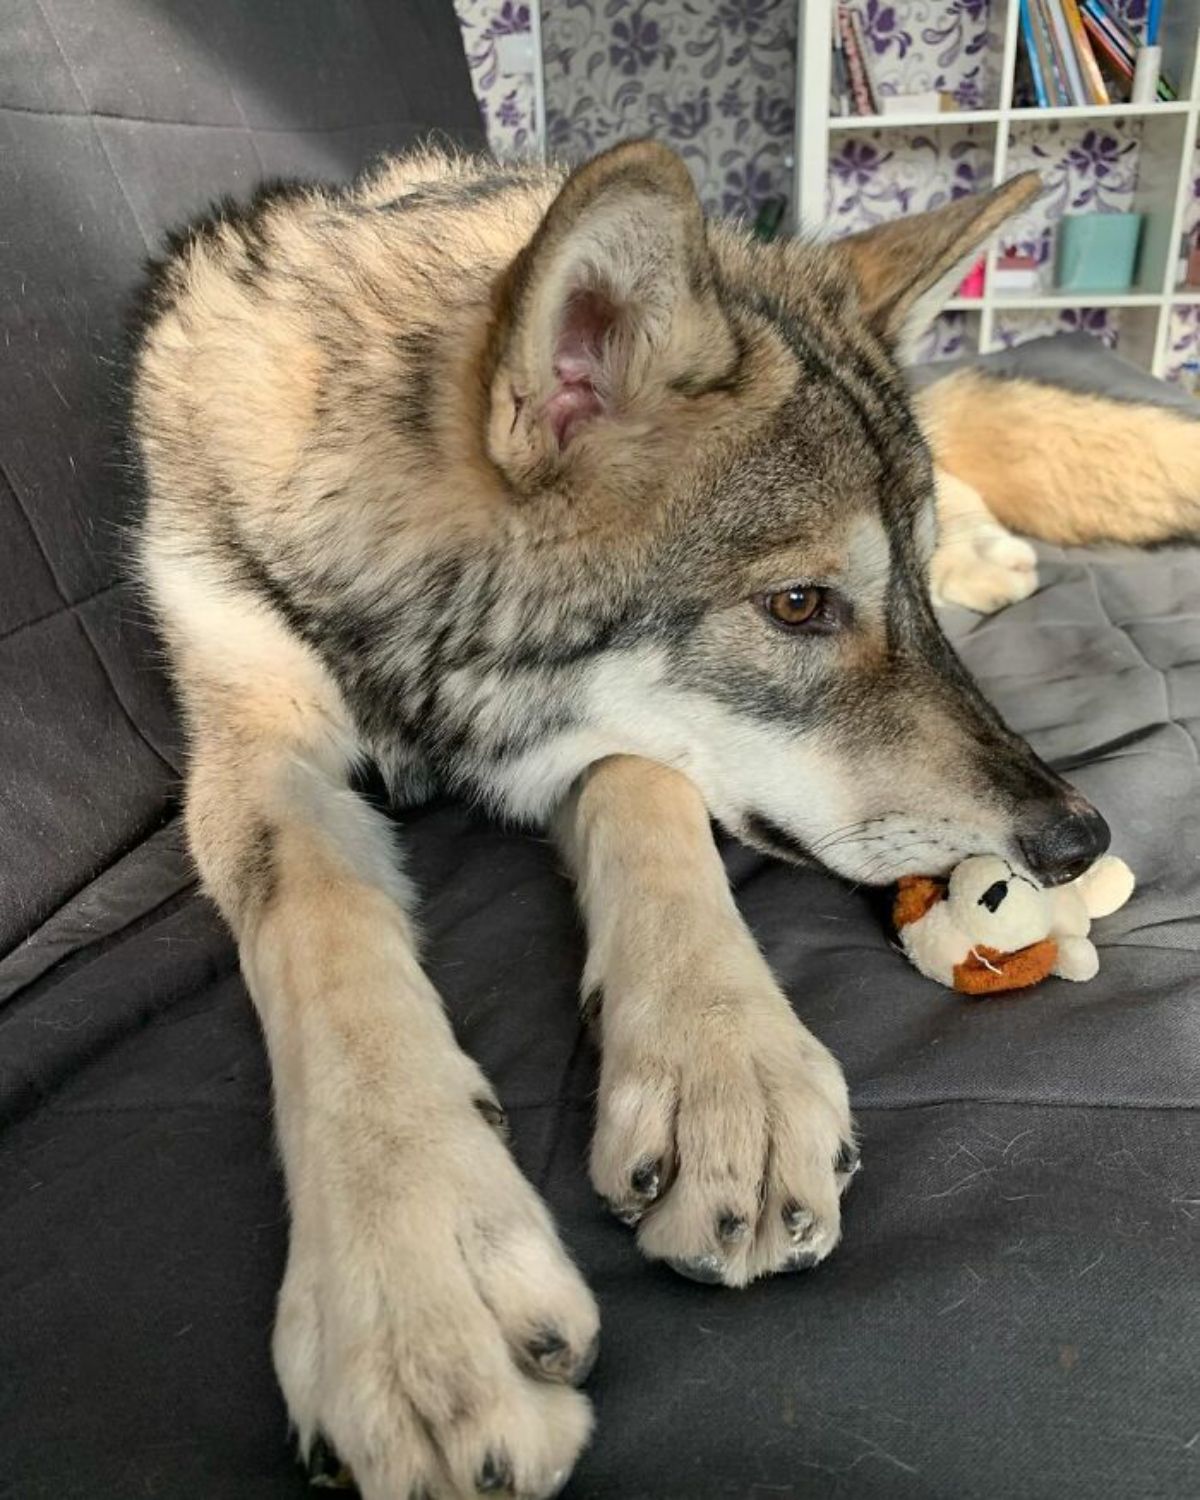 wolf lying down on a black couch with its nose on a brown and white dog stuffed toy